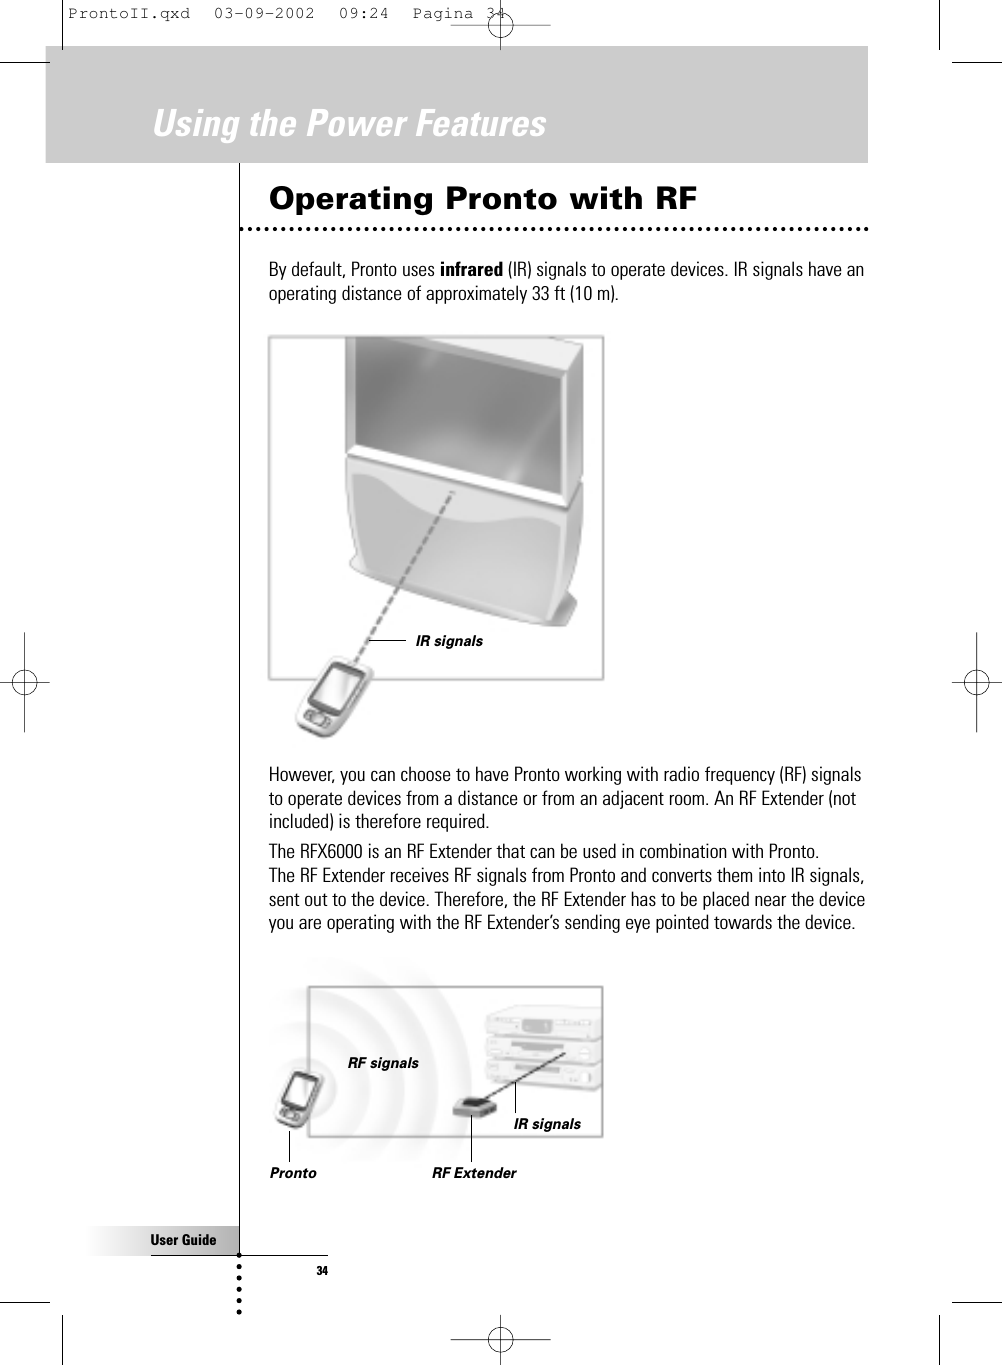 User Guide34Operating Pronto with RFBy default, Pronto uses infrared (IR) signals to operate devices. IR signals have anoperating distance of approximately 33 ft (10 m).However, you can choose to have Pronto working with radio frequency (RF) signalsto operate devices from a distance or from an adjacent room. An RF Extender (notincluded) is therefore required.The RFX6000 is an RF Extender that can be used in combination with Pronto. The RF Extender receives RF signals from Pronto and converts them into IR signals,sent out to the device. Therefore, the RF Extender has to be placed near the deviceyou are operating with the RF Extender’s sending eye pointed towards the device.Using the Power FeaturesIR signalsIR signalsRF signalsPronto RF ExtenderProntoII.qxd  03-09-2002  09:24  Pagina 34